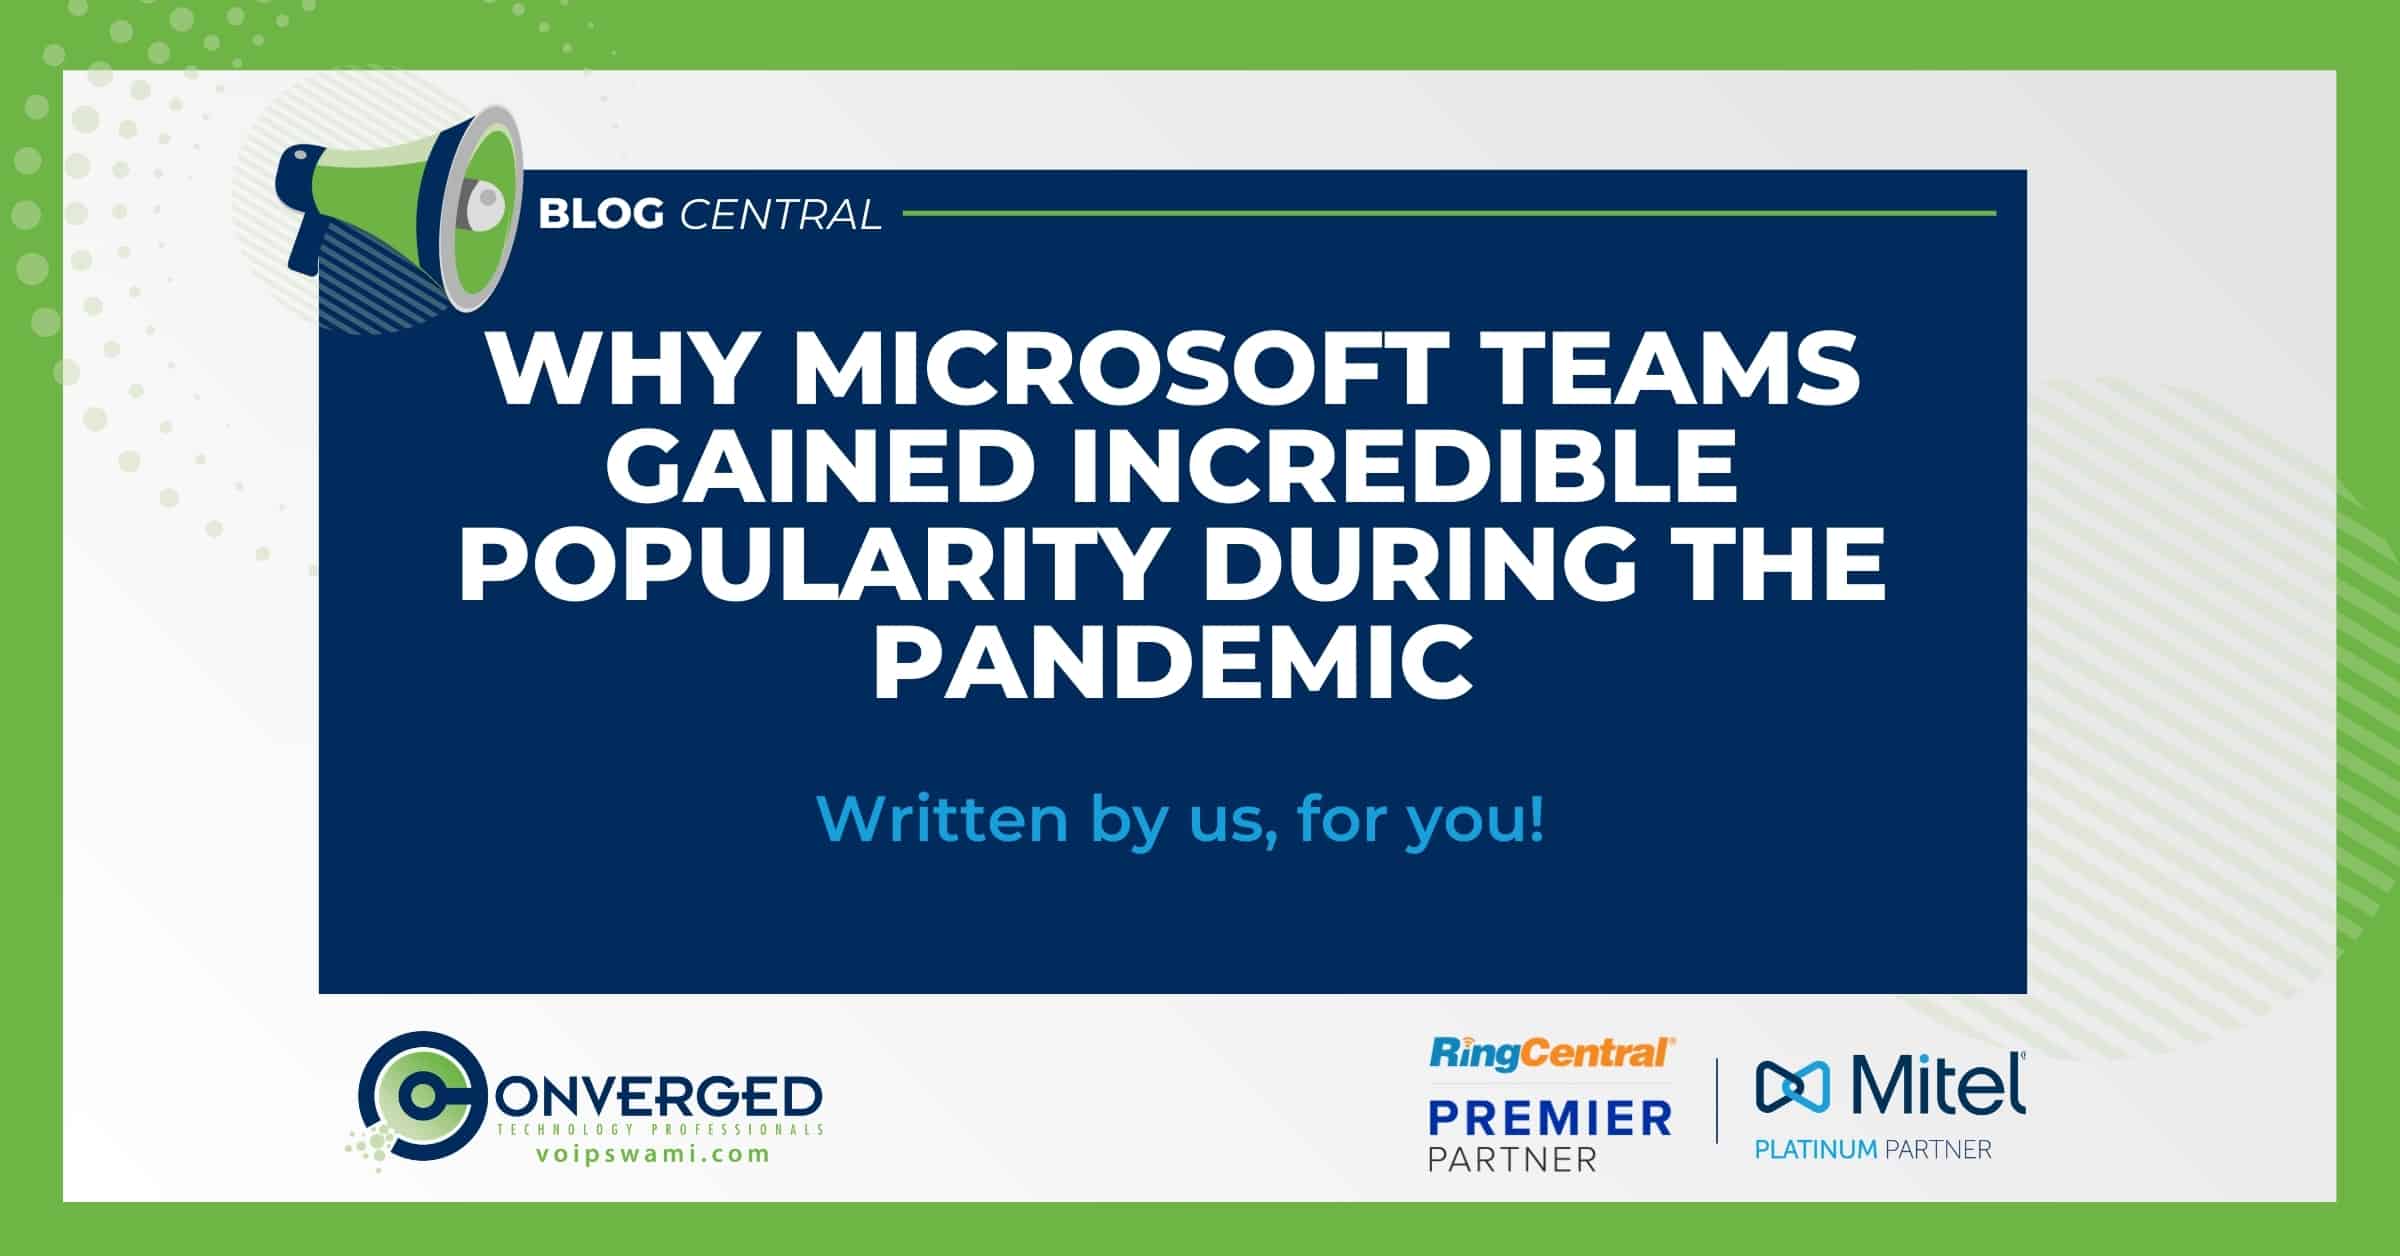 Why Microsoft Teams Gained Incredible Popularity During the Pandemic